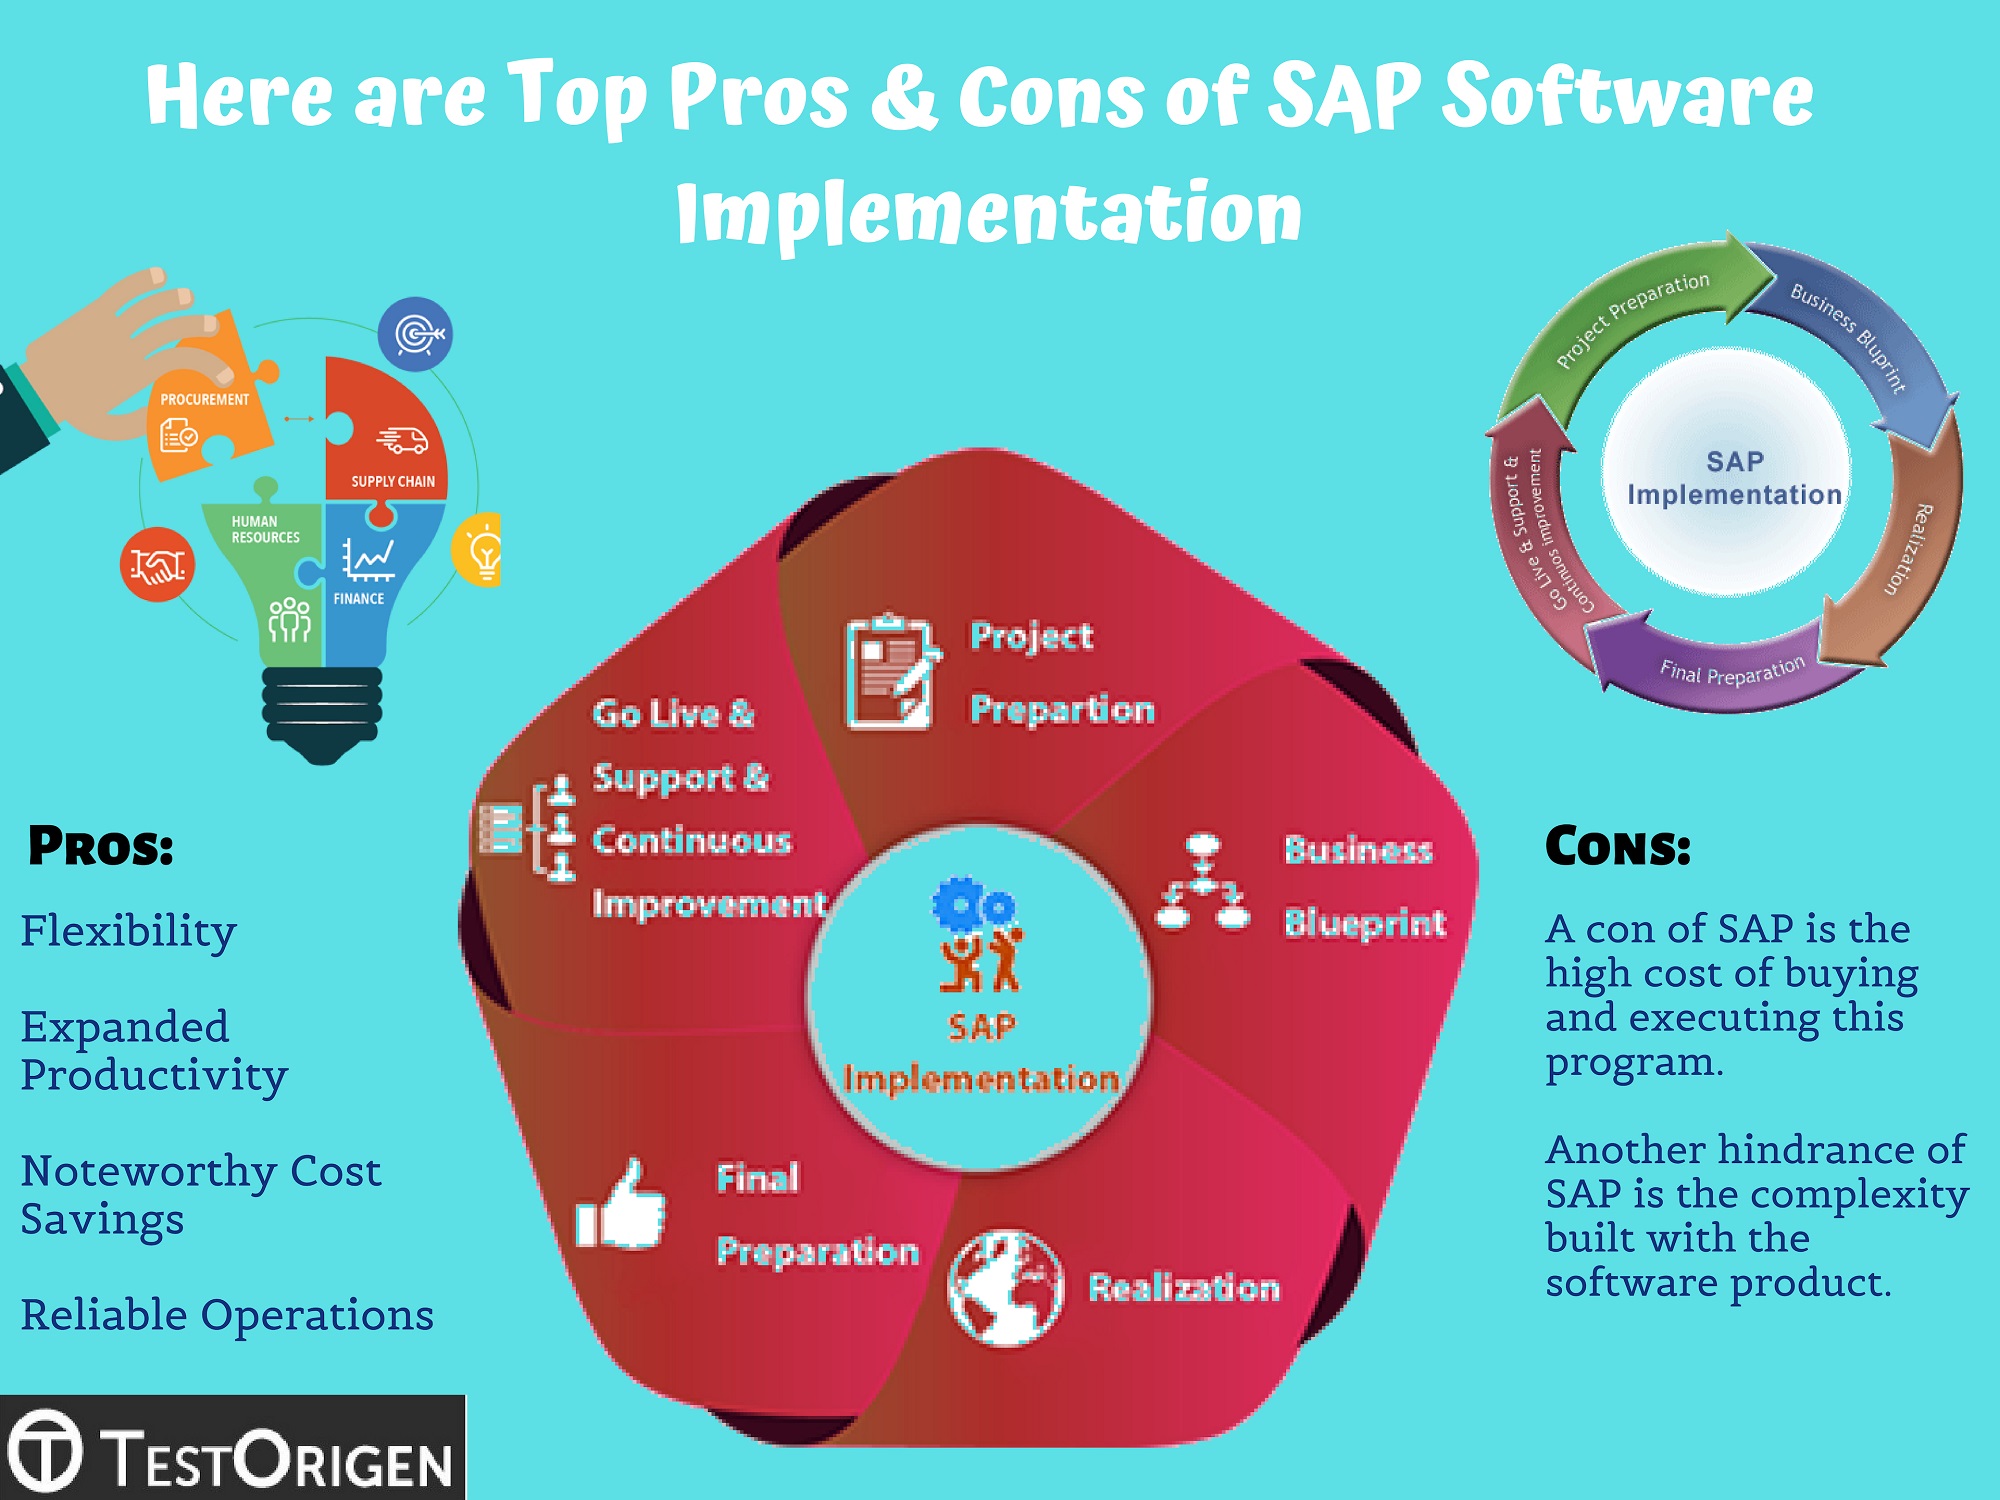 Here are Top Pros & Cons of SAP Software Implementation